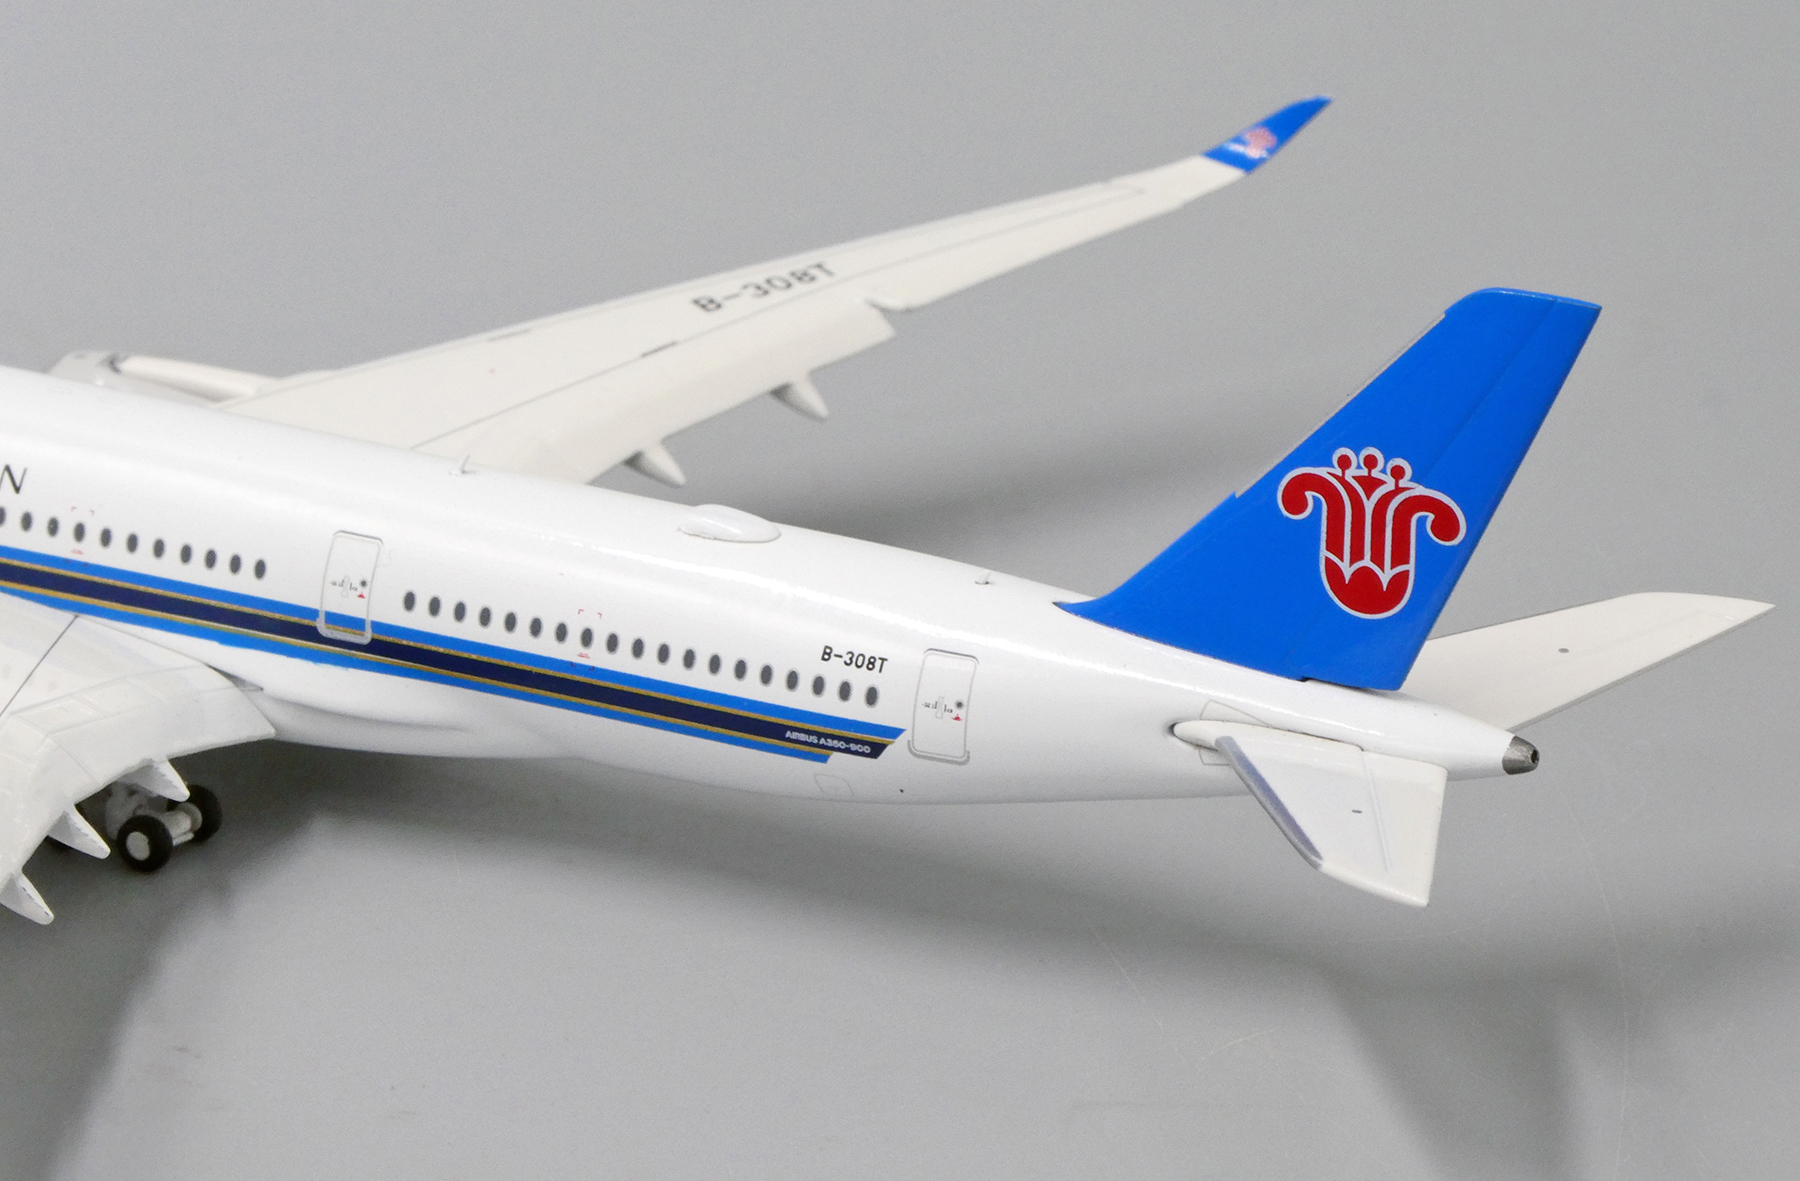 Details about   JCWINGS JC4082 1/400 CHINA SOUTHERN AIRLINES COMAC C919 